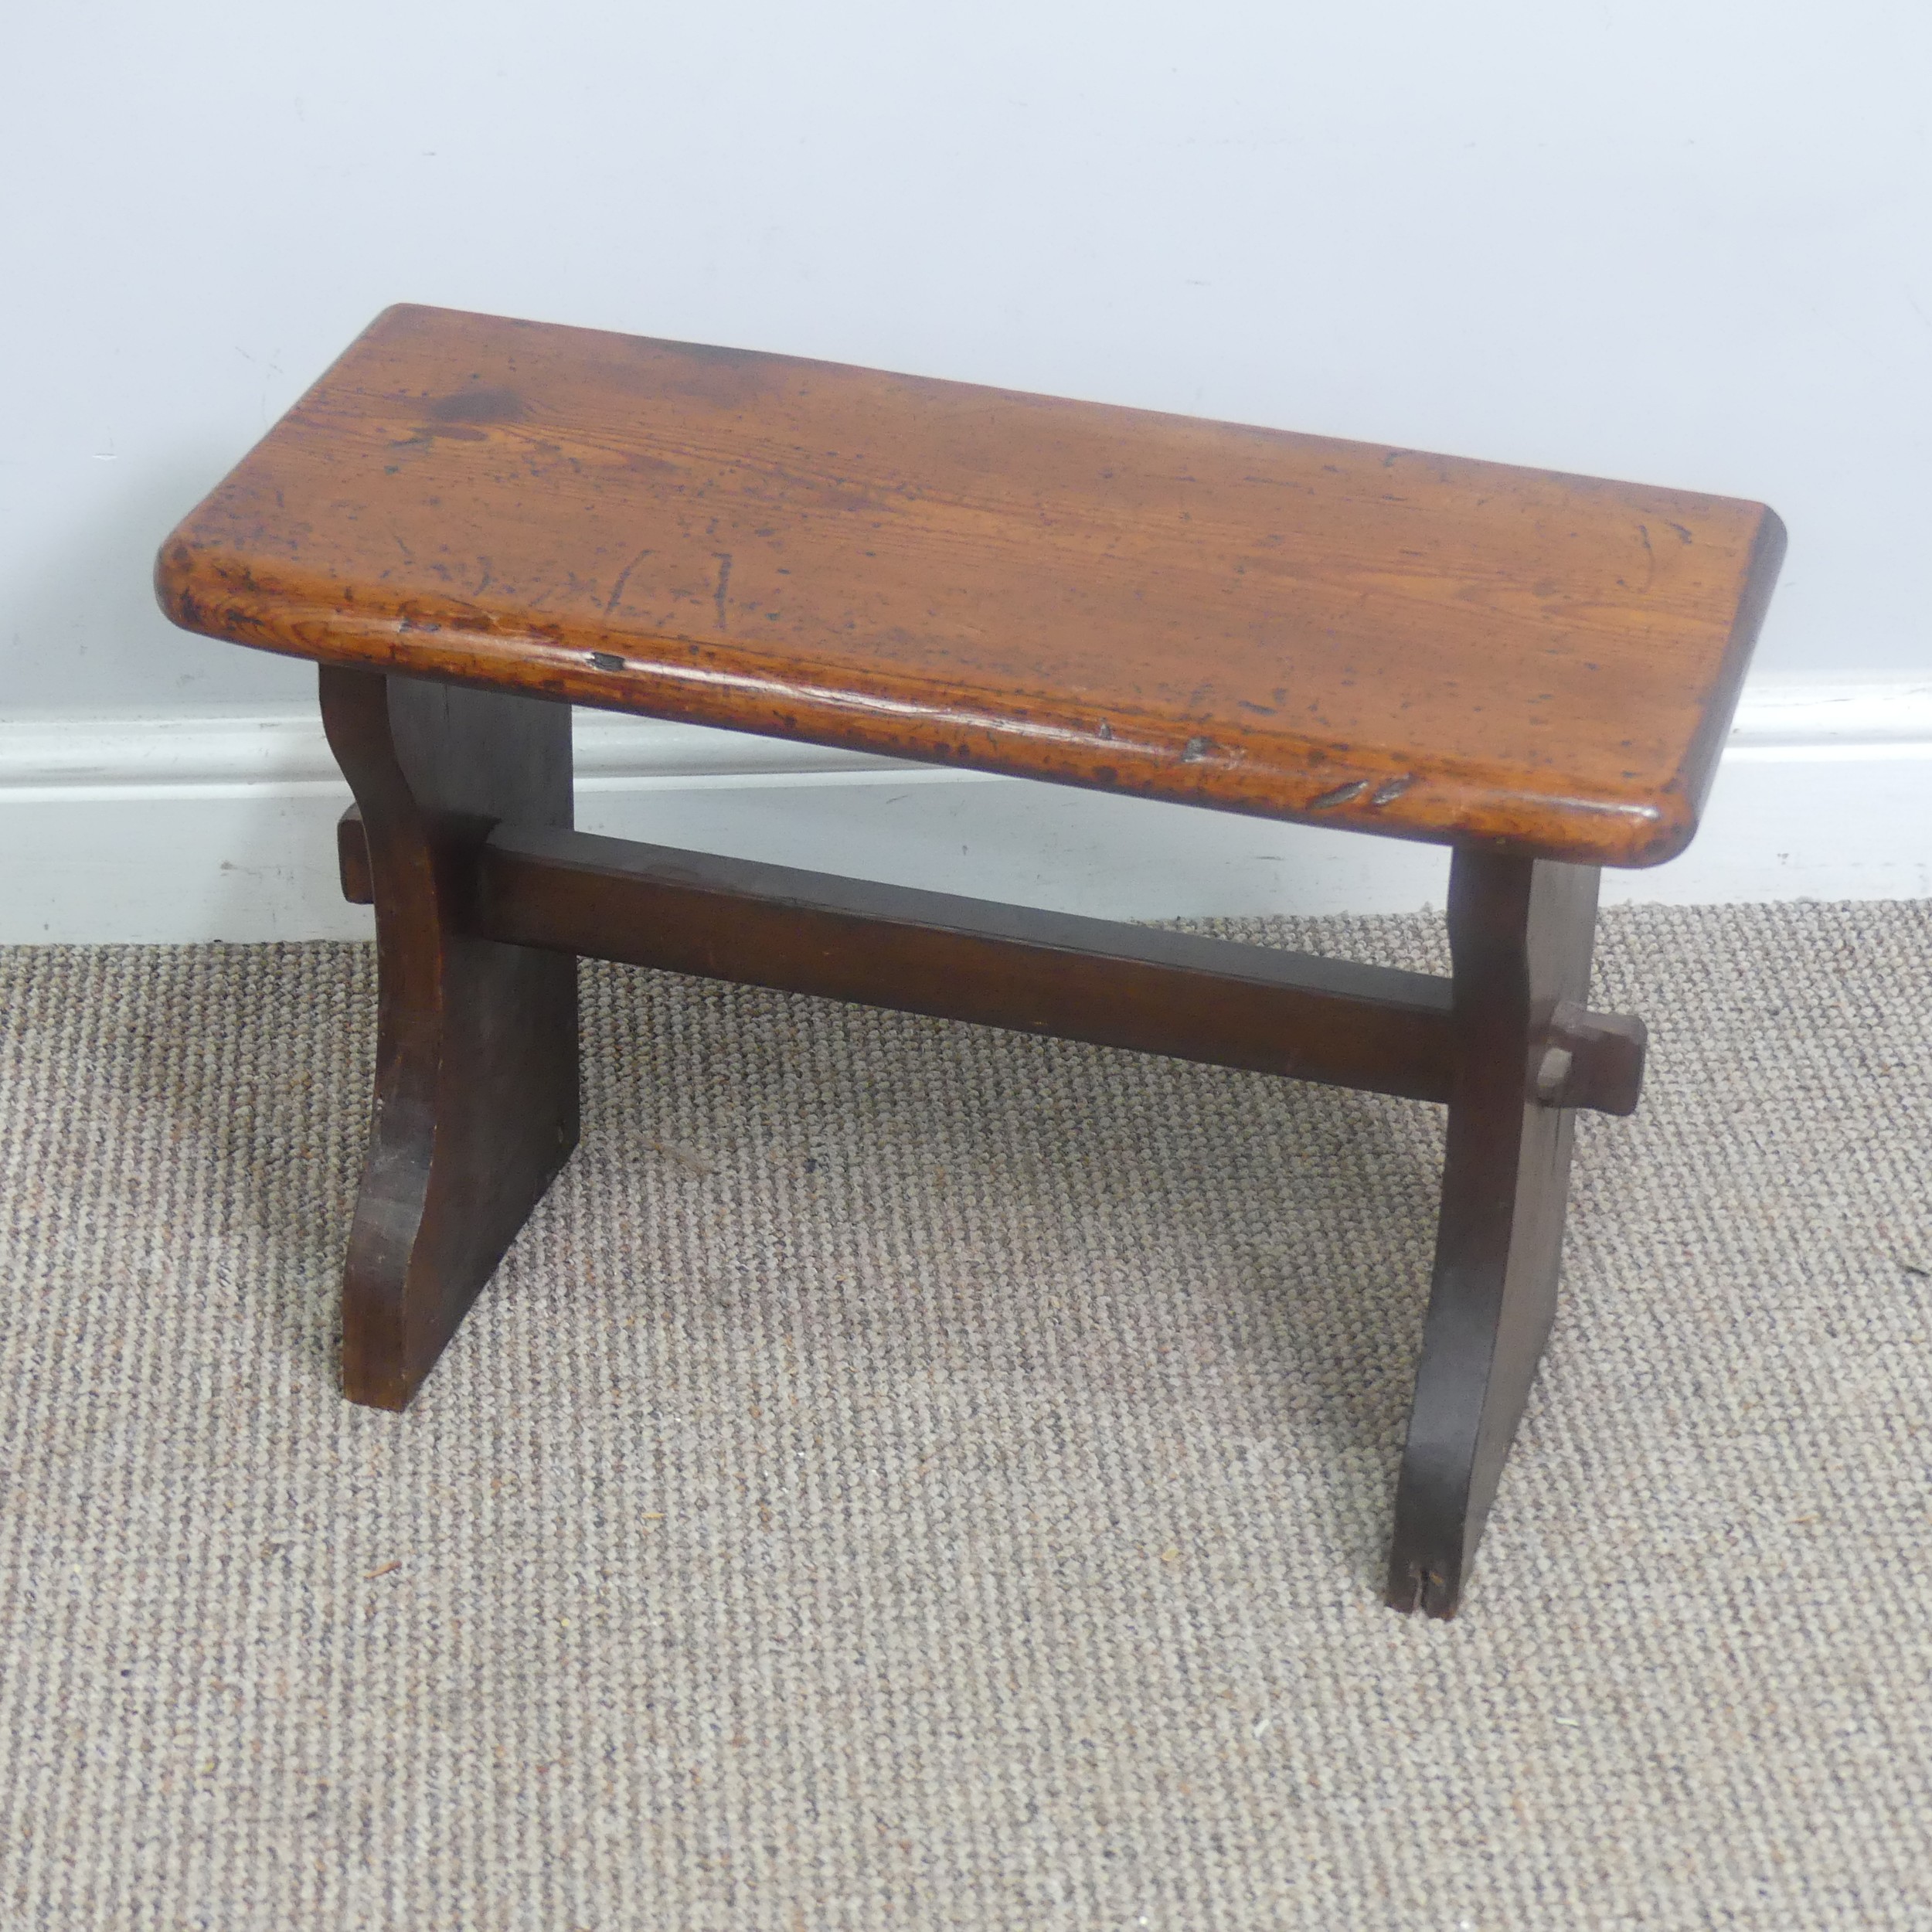 An 18th century style oak Joint Stool, W 45.5 cm x H 45.5 cm x D 30 cm, together with another - Image 4 of 5